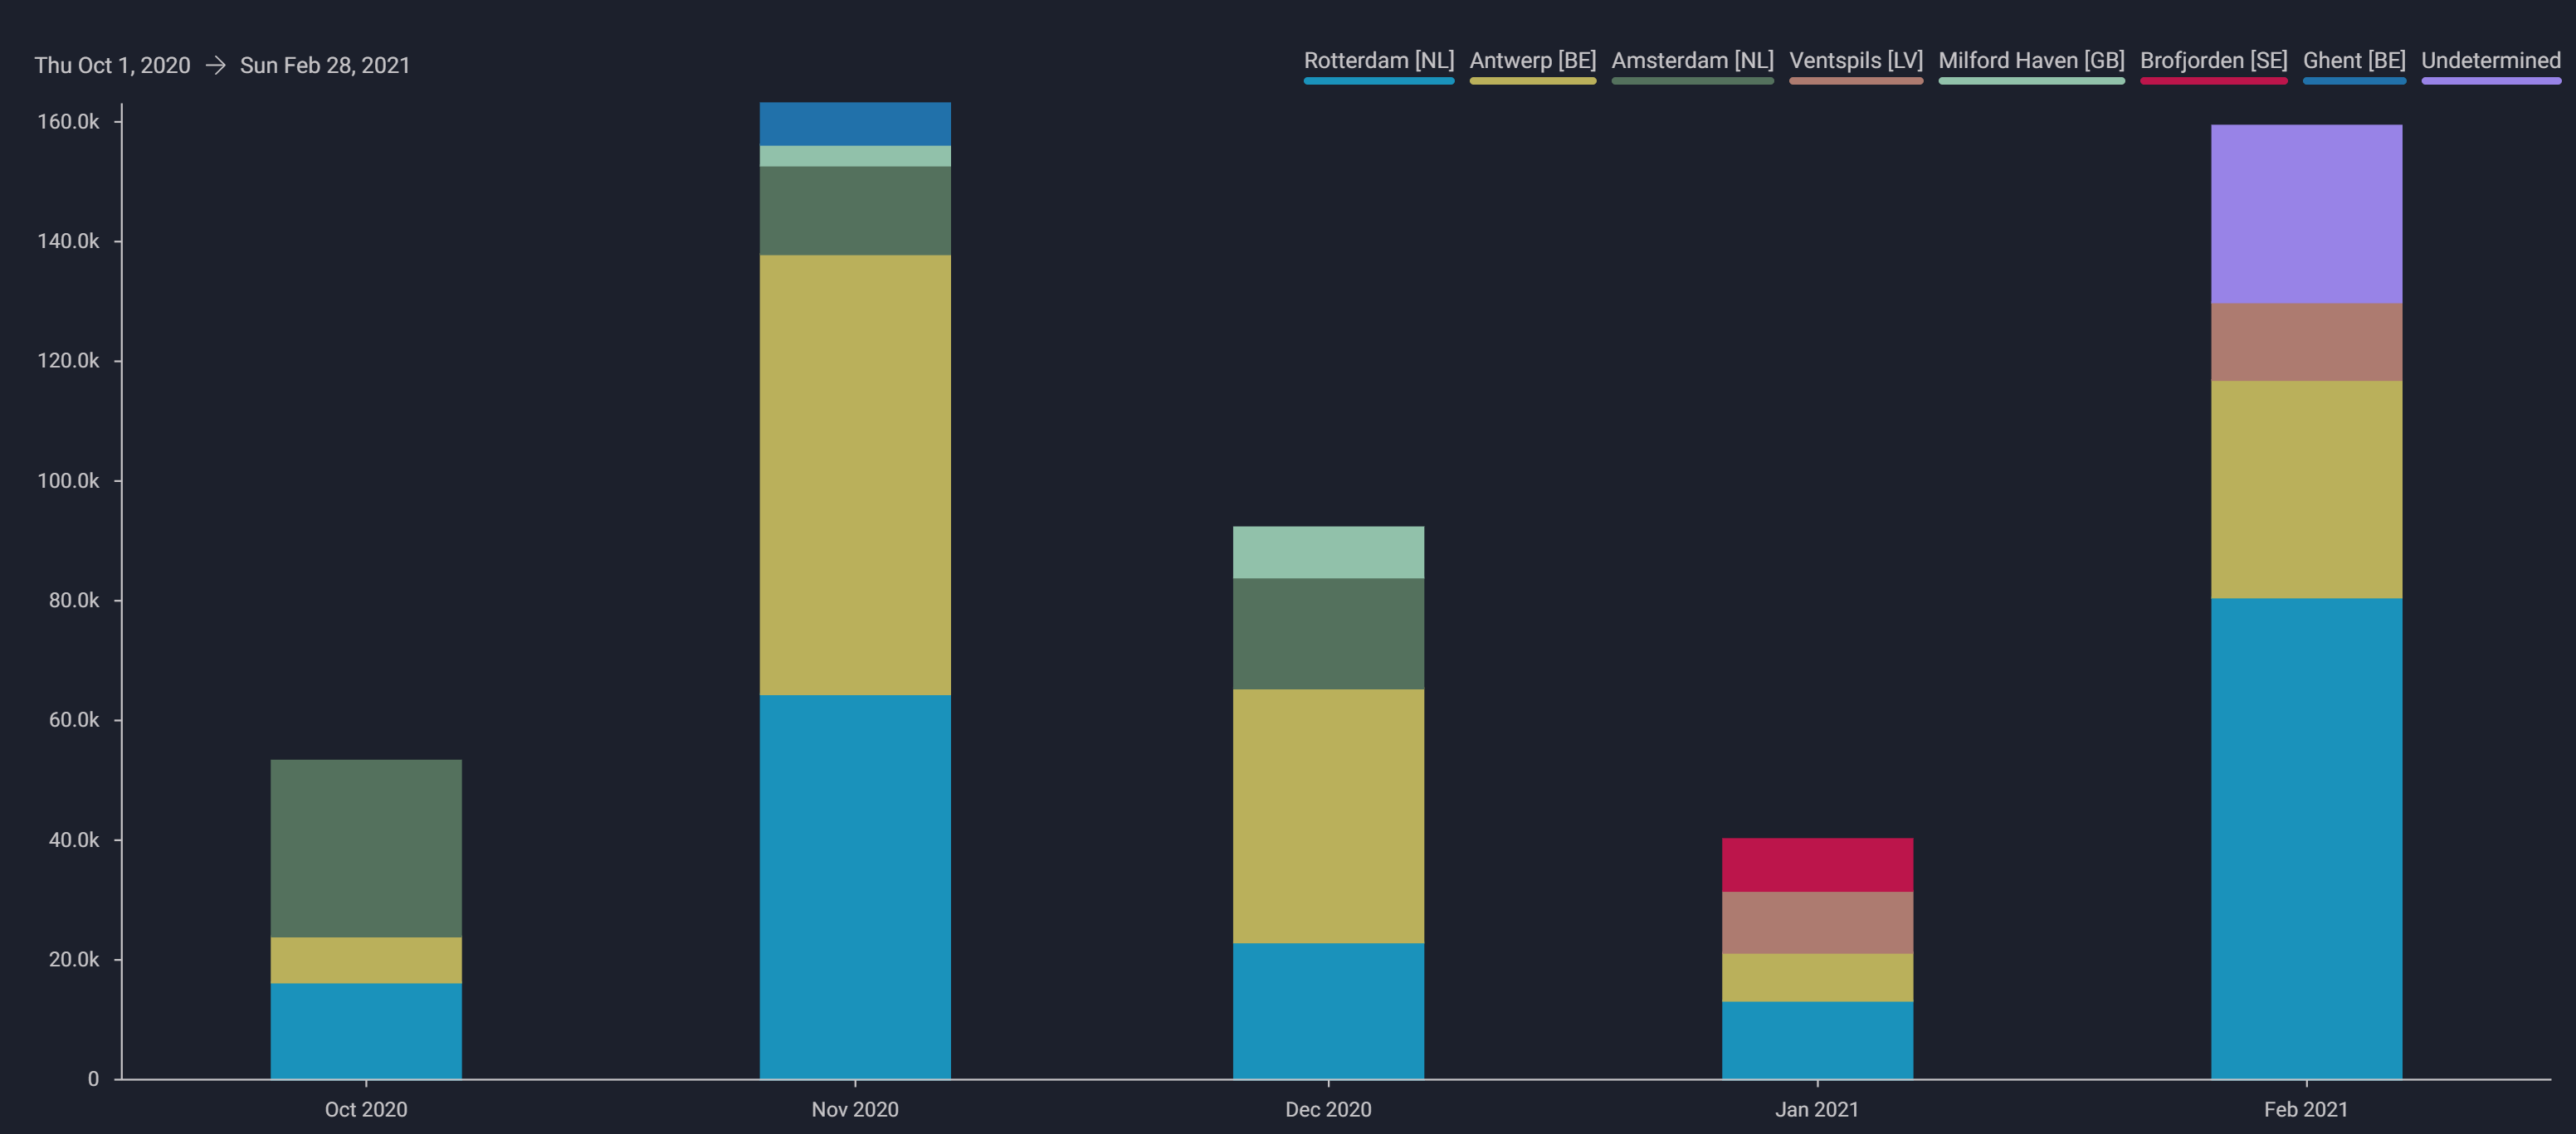 bar chart comparing several cities